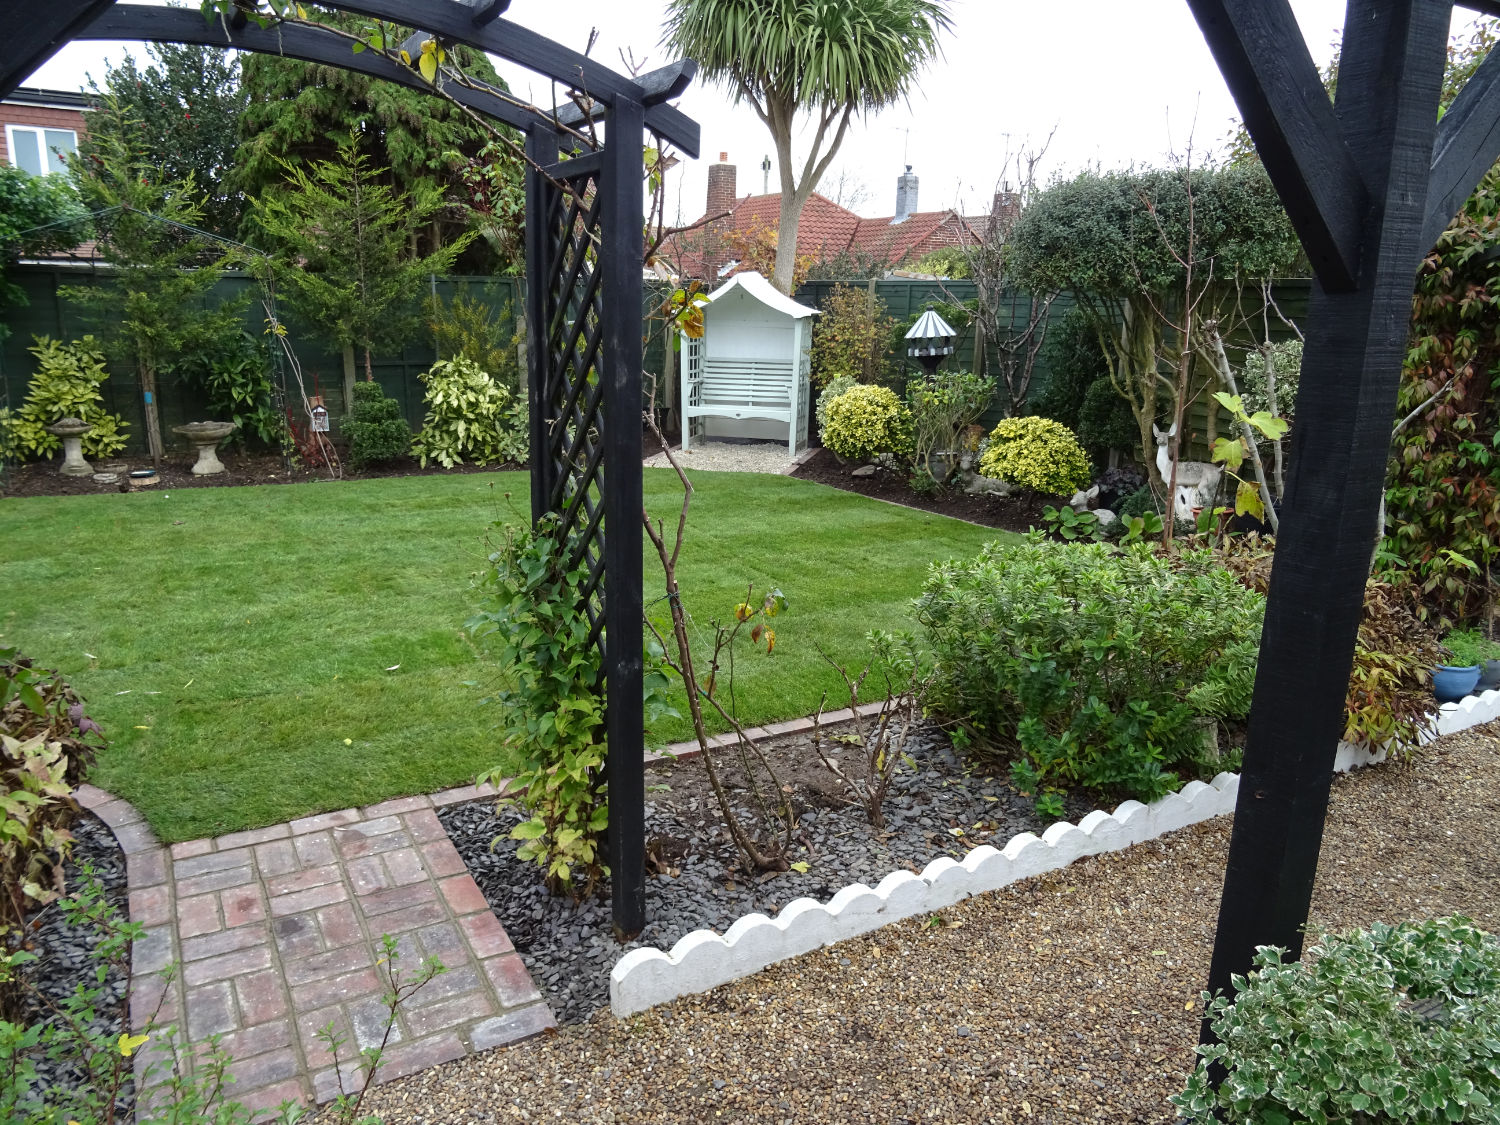 Rear garden with gravel pathway leading through a pergola onto the lawn surrounded by borders of shrubs and a garden seat